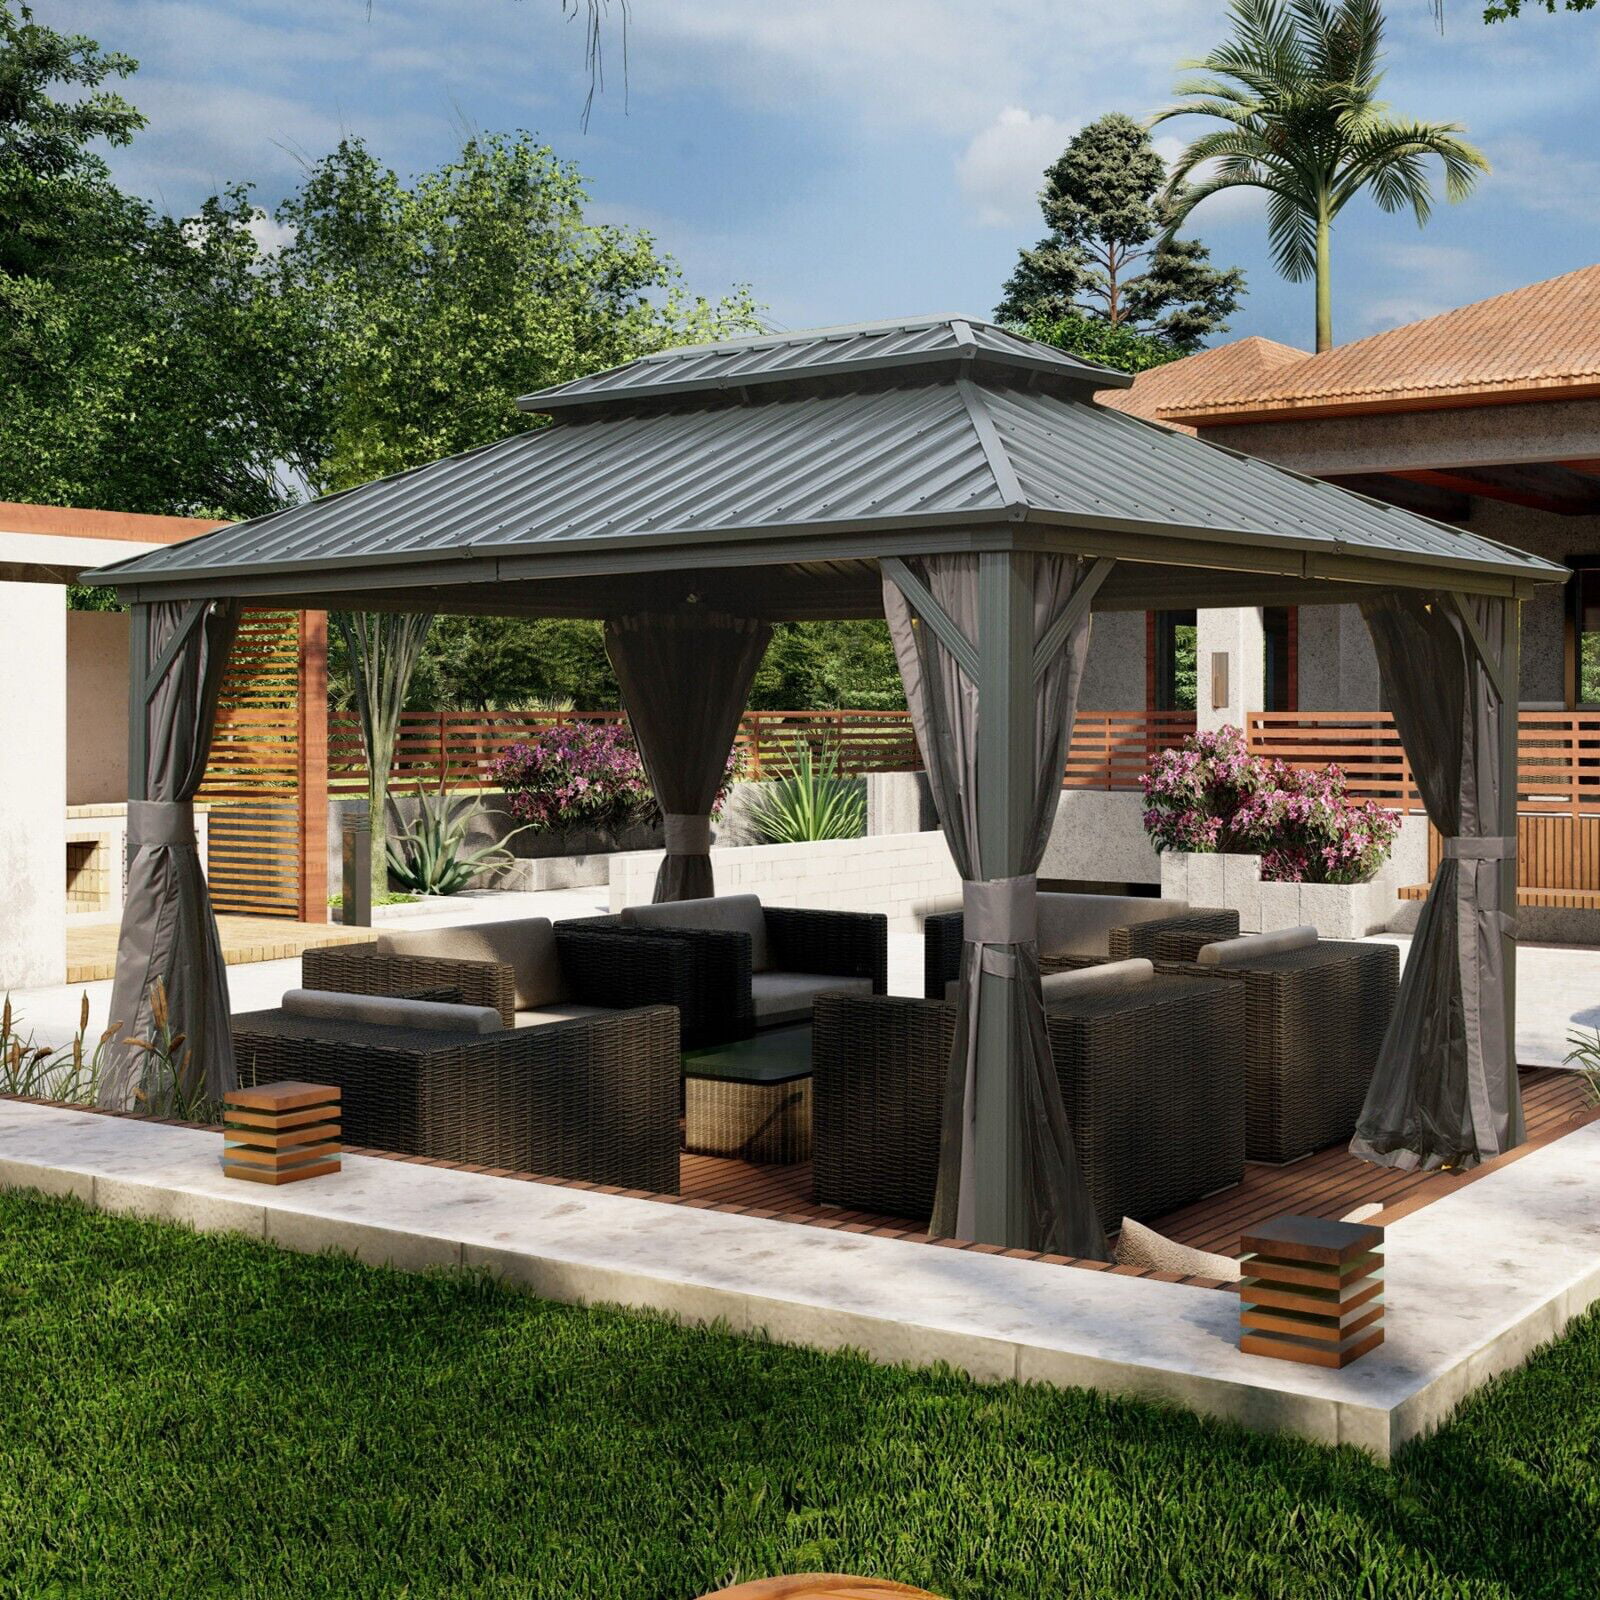 Domi Outdoor Living 10’ x 12’ Hardtop Gazebo Canopy with Netting &  Curtains, Outdoor Aluminum Gazebo with Galvanized Steel Double Roof for  Patio Lawn 